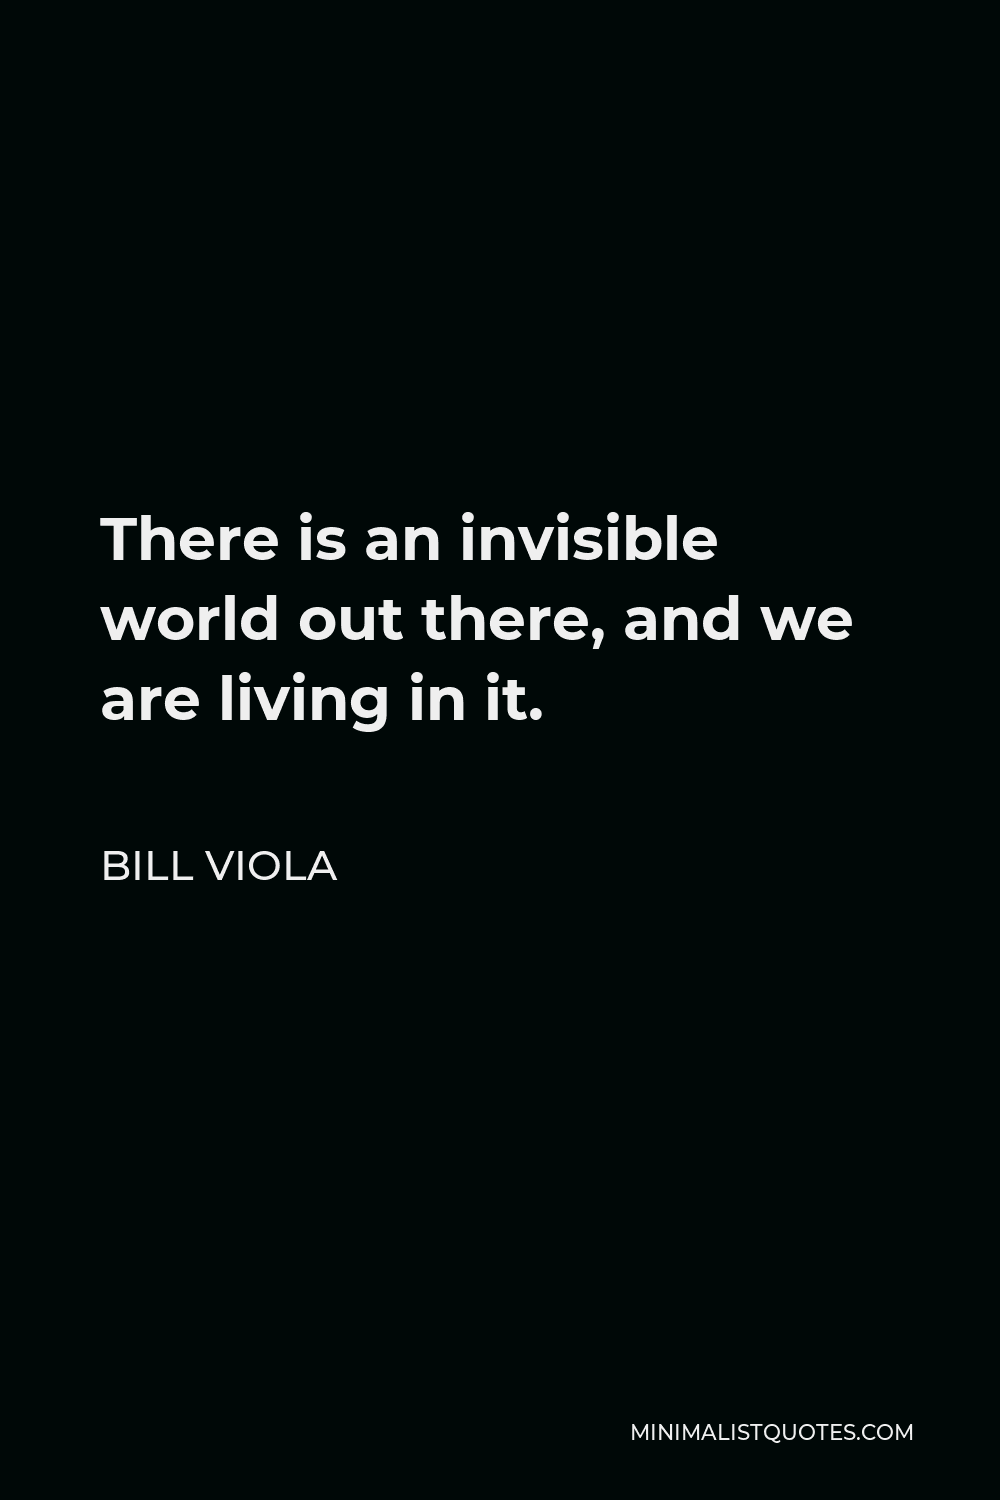 Bill Viola Quote - There is an invisible world out there, and we are living in it.